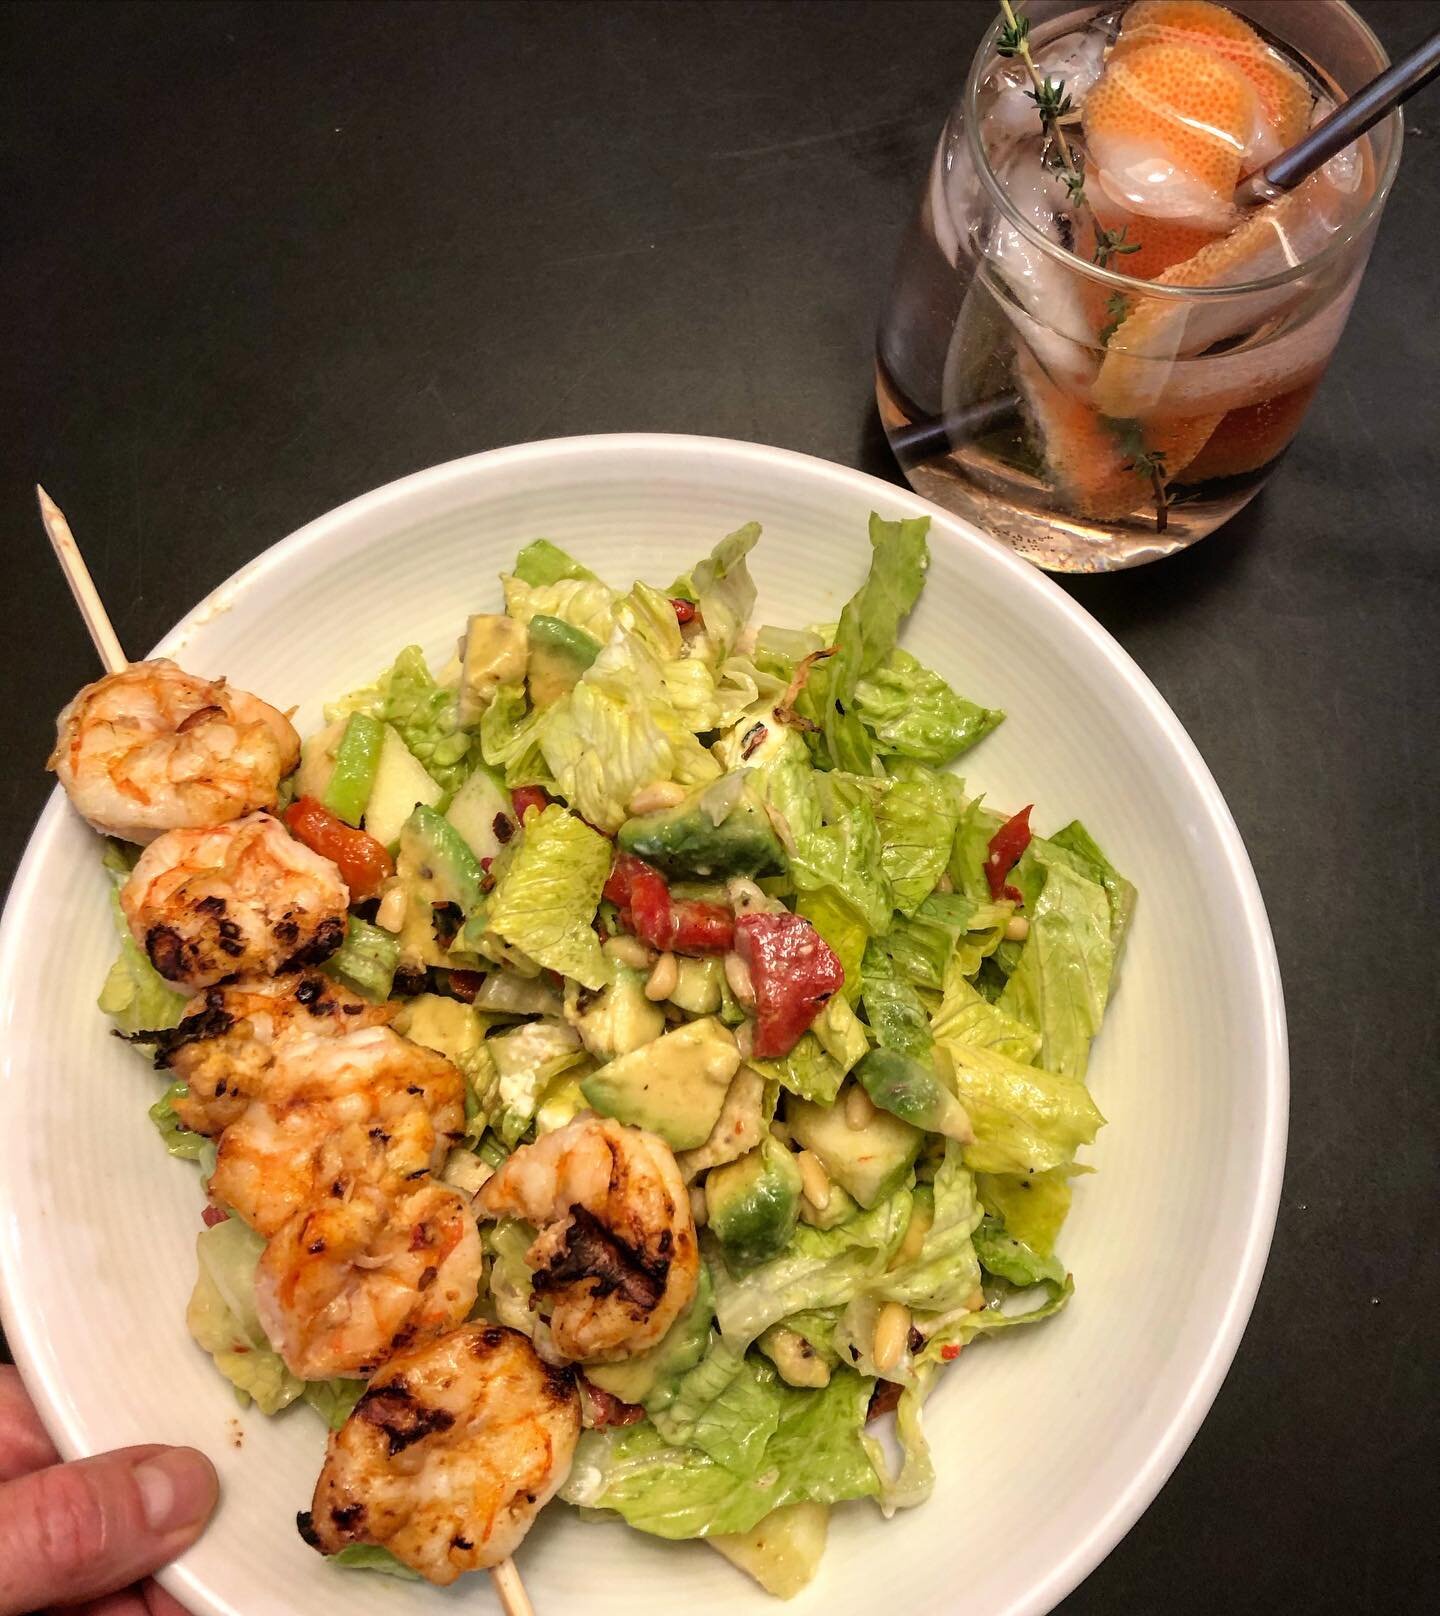 Happy Saturday!! My college days were spent working at Boston&rsquo;s Prudential location of @legalseafoods. I still have nostalgia about this salad, so recreated it tonight!!! Paired with my bestie @allegraeveangelo/ @getvinya tequila spritz!

2 hea